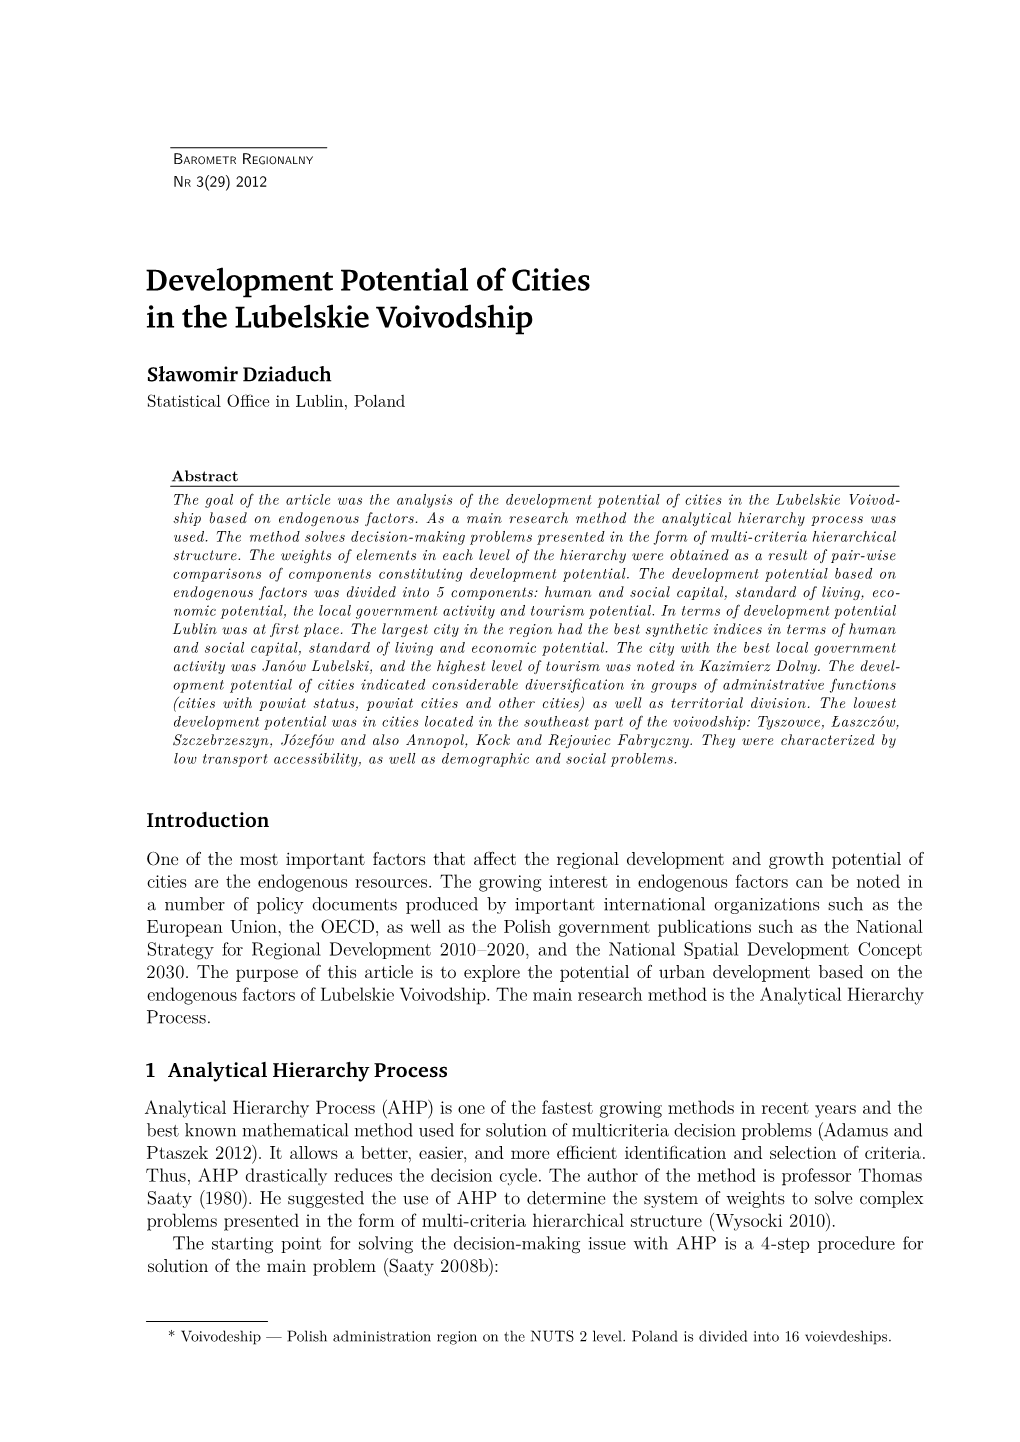 Development Potential of Cities in the Lubelskie Voivodship